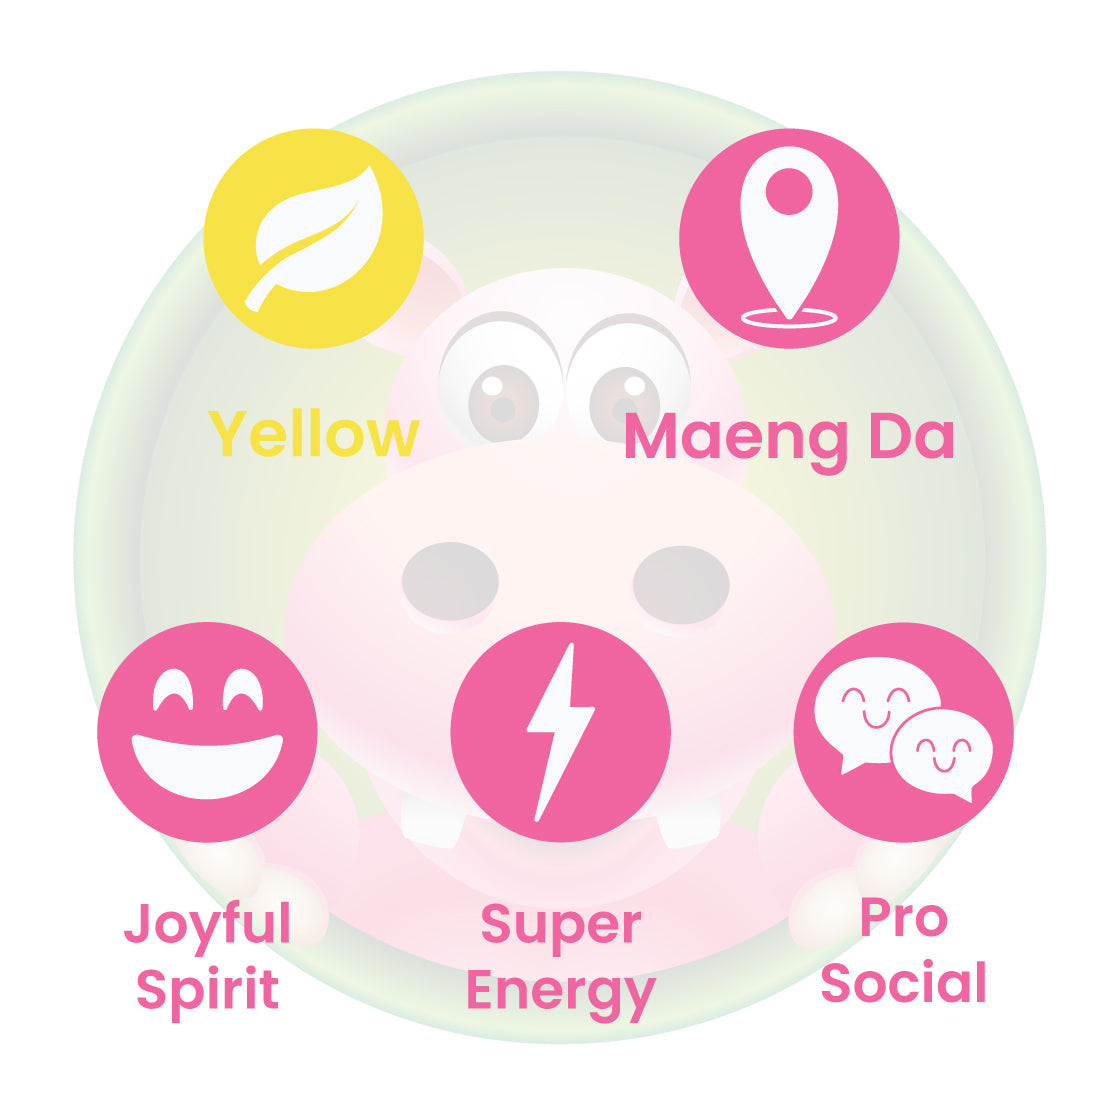 Infographic Details for Happy Hippo Yellow Vein Maeng Da Kratom Powder. Leaf color: Yellow Vein. Kratom Strain Origin: Maeng Da. Kratom Effects resonate with Joyful Spirit, Pro Social, and Super Energy.